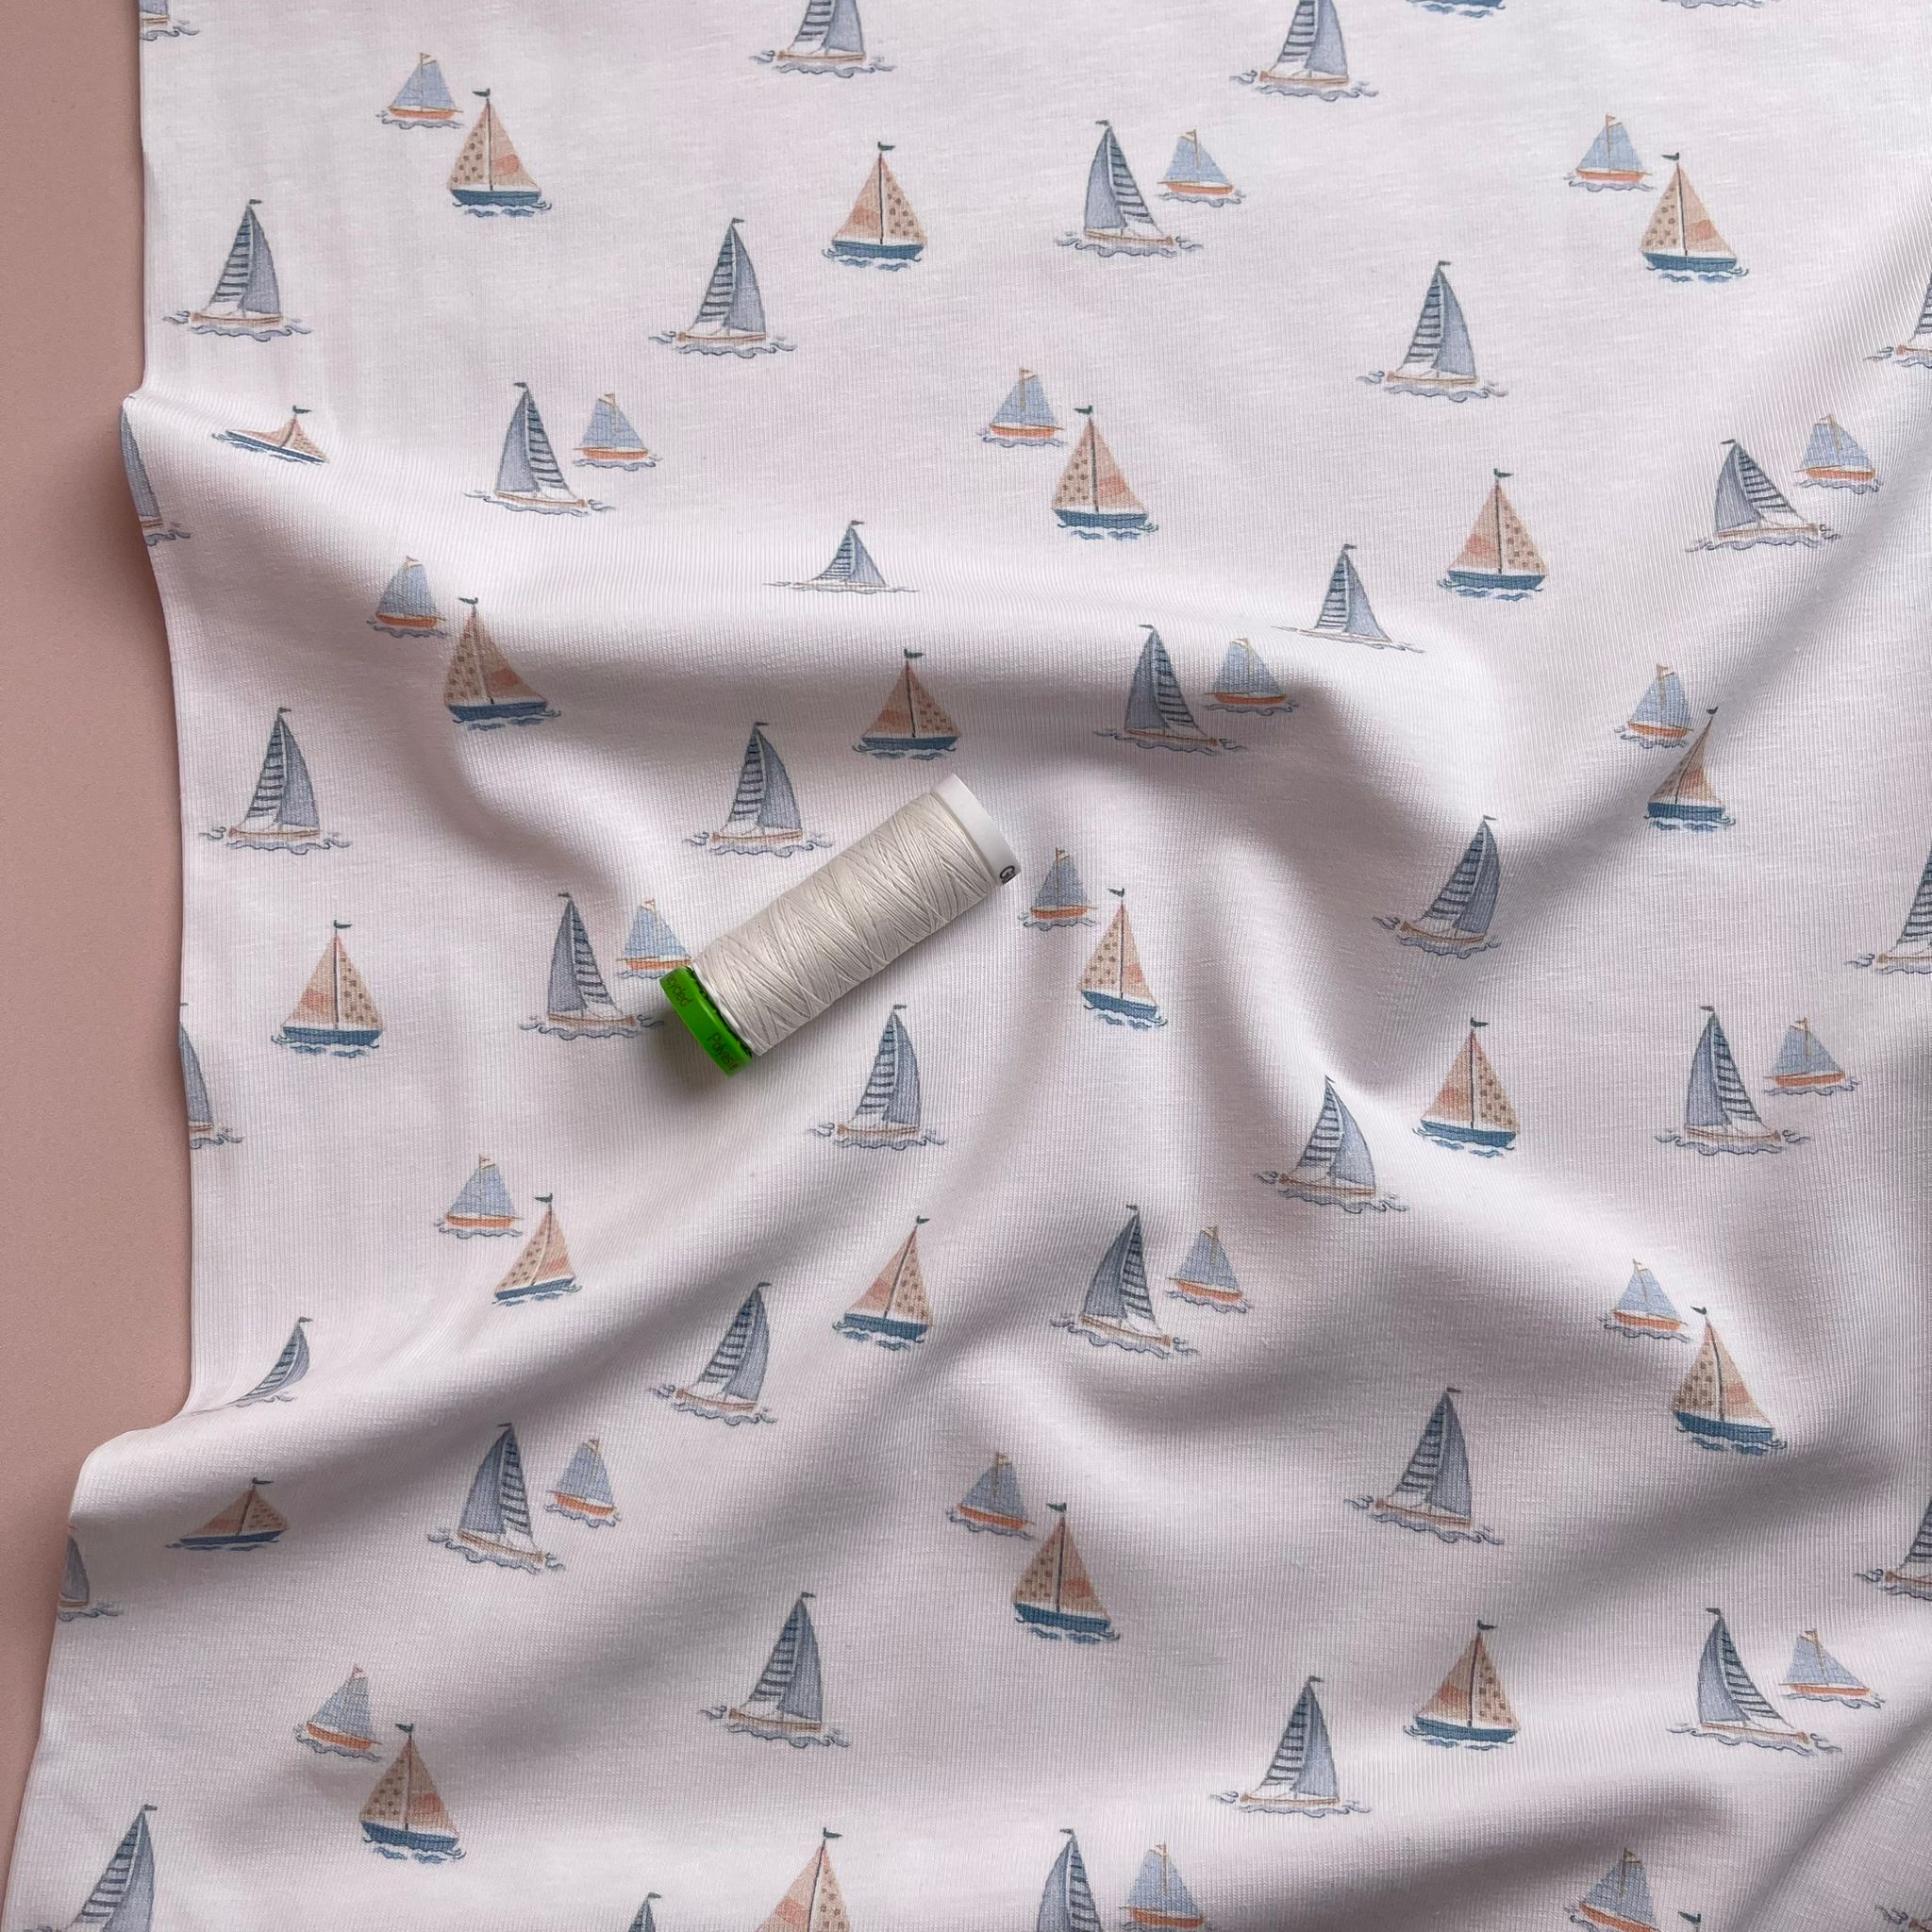 REMNANT 1.28 Metres - Sailing Boats White Organic Cotton Jersey Fabric